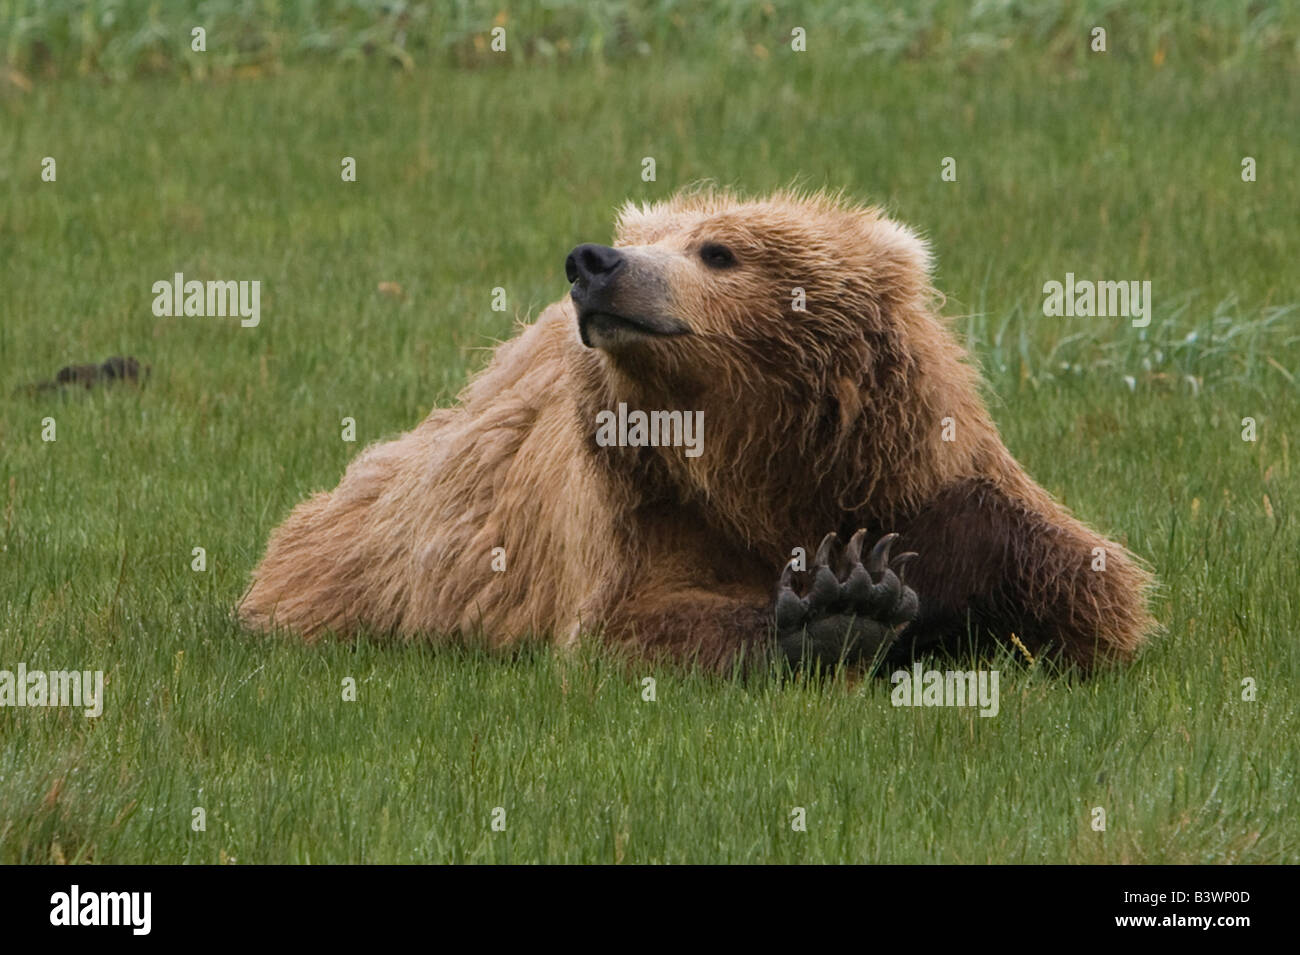 Young Grizzly bear relaxing and showing off its claws, Katmai National Park, Alaska Stock Photo